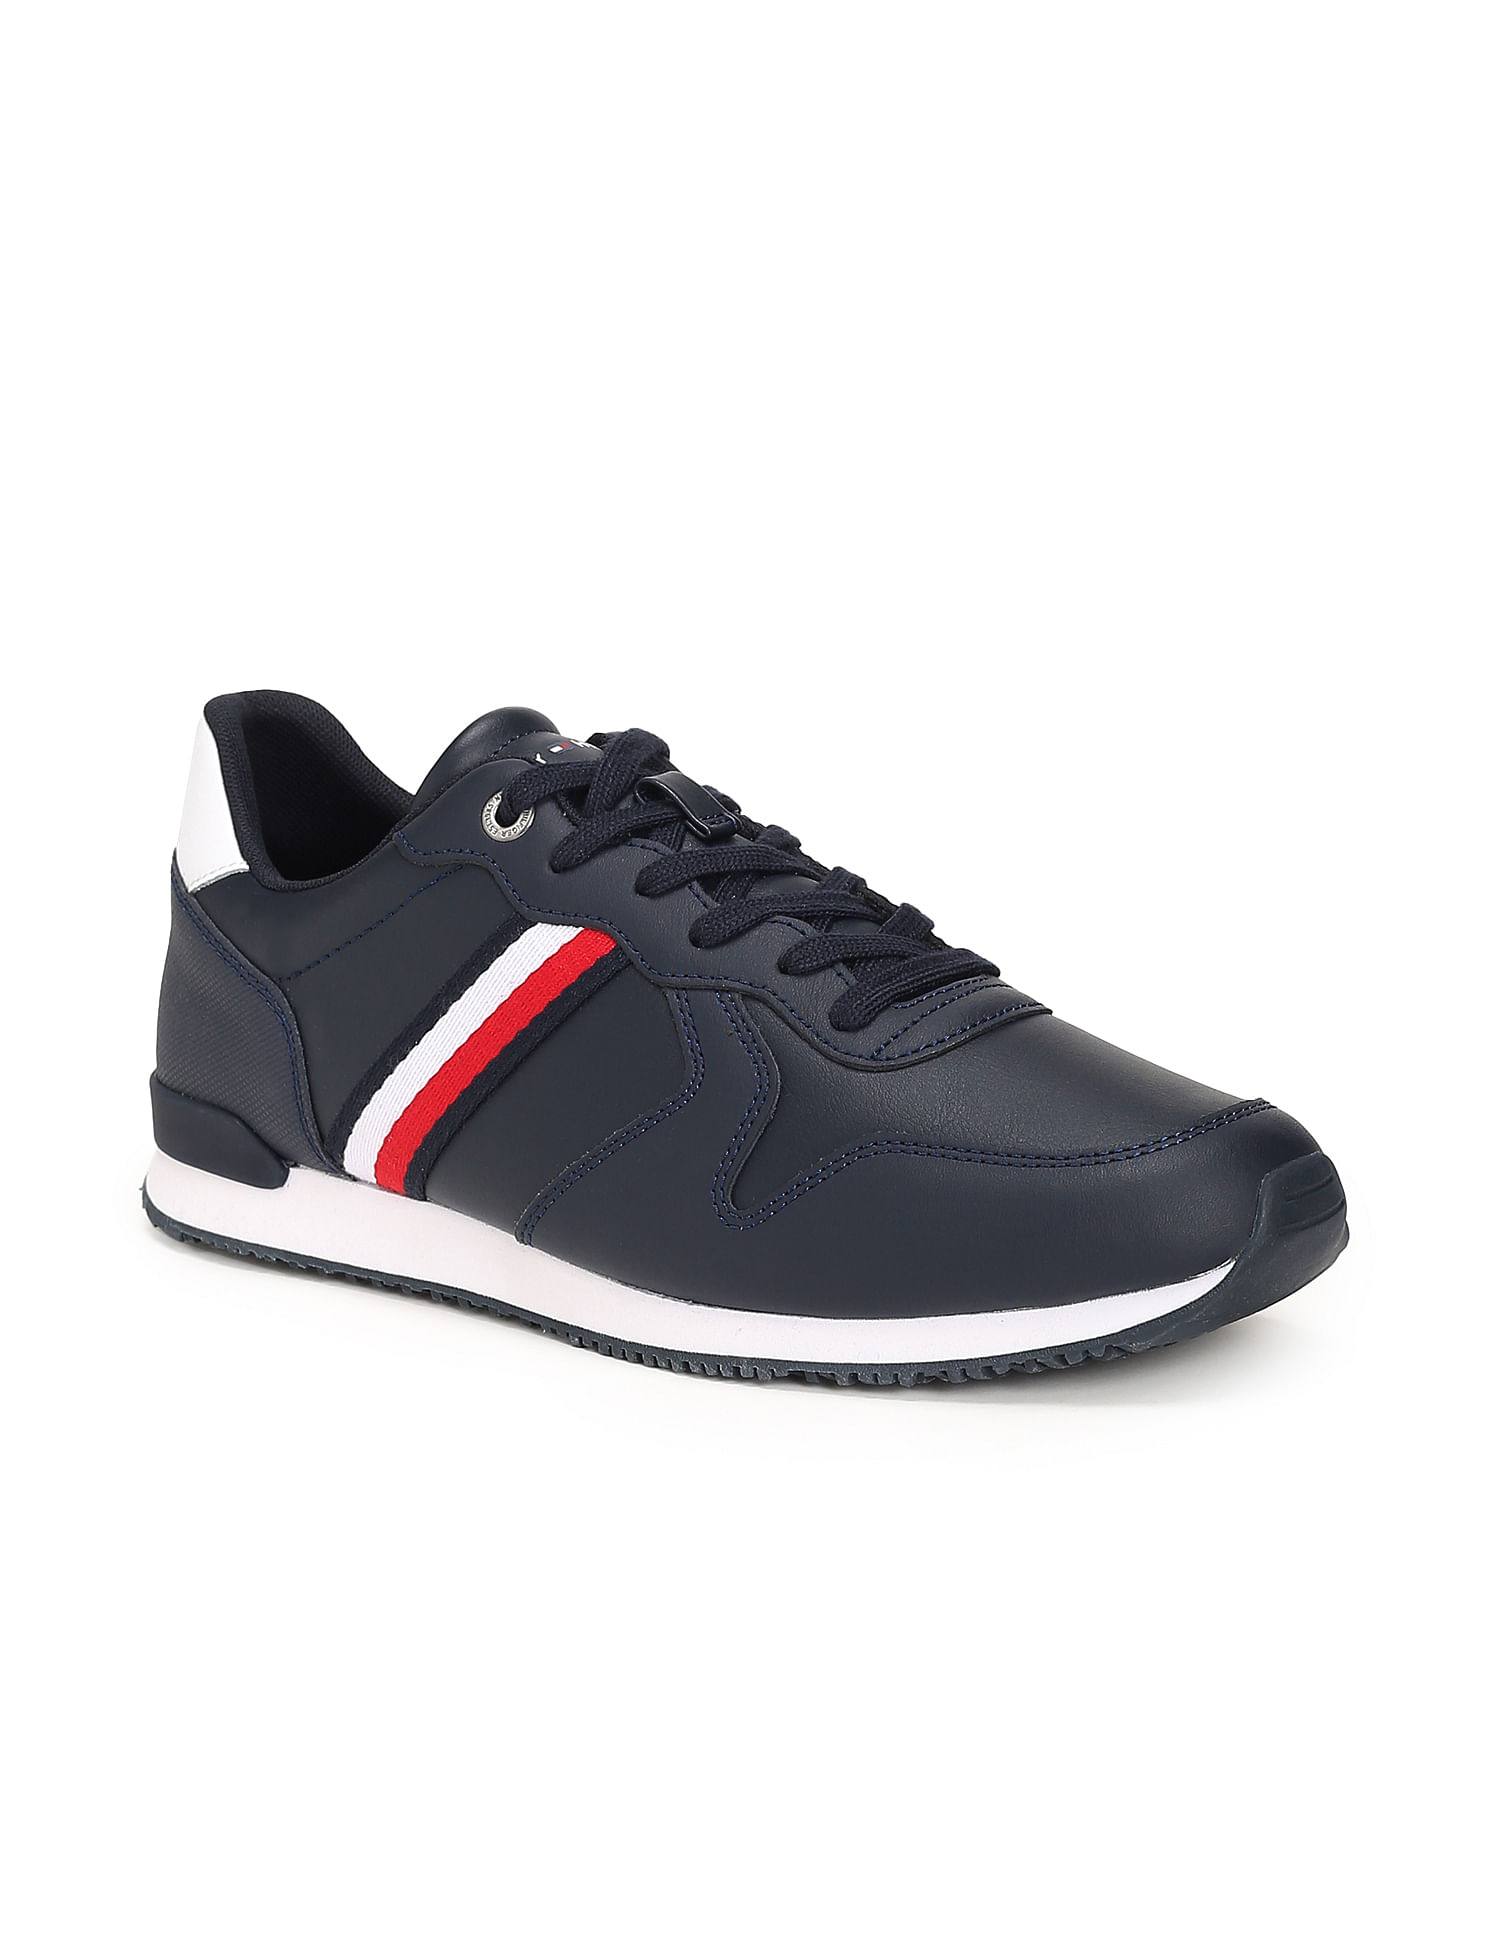 Adidas and Prada have reimagined one of the sneaker world's most iconic  shoes | Esquire Middle East – The Region's Best Men's Magazine